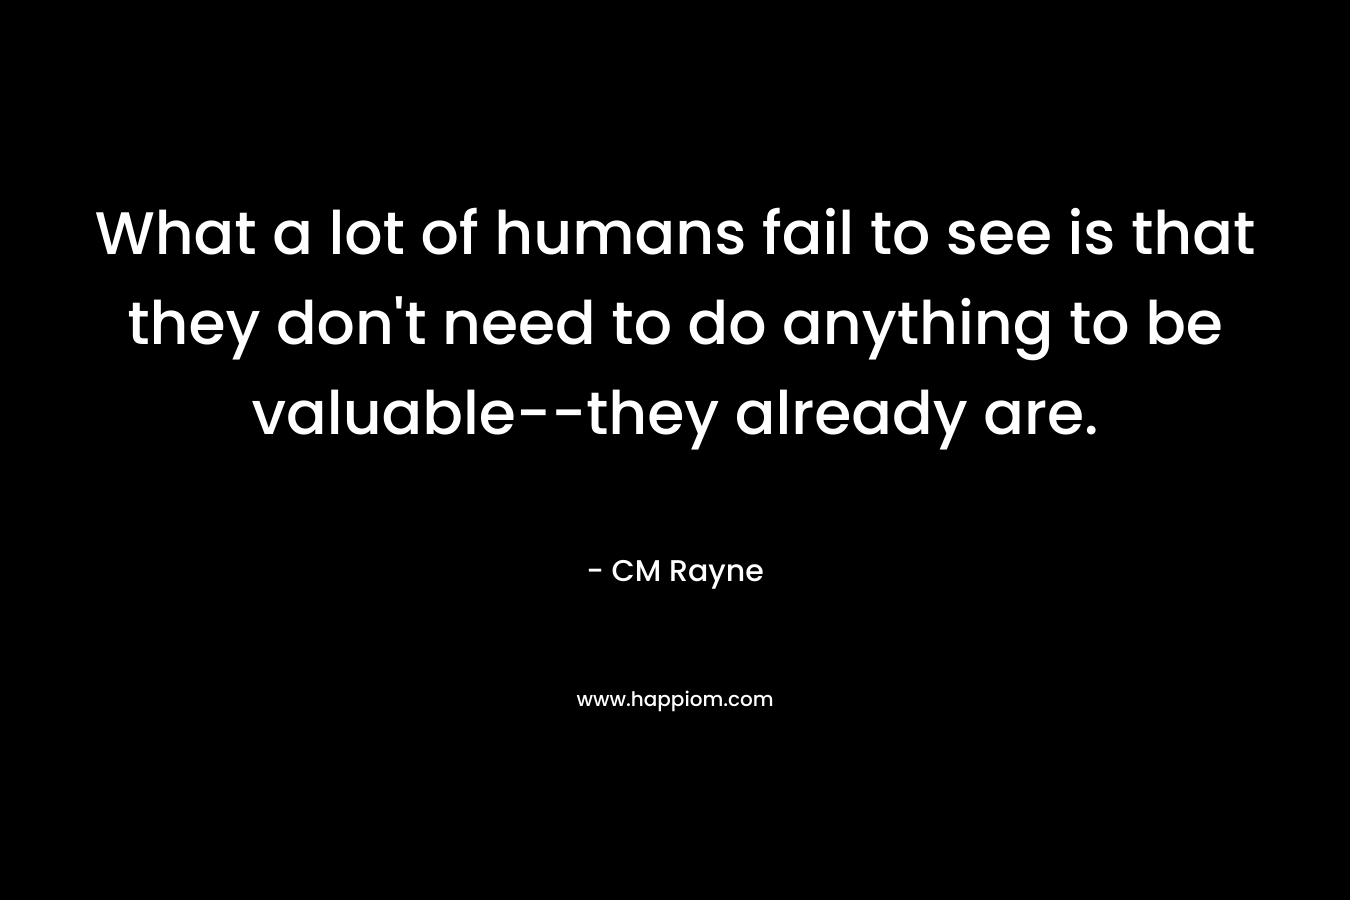 What a lot of humans fail to see is that they don't need to do anything to be valuable--they already are.